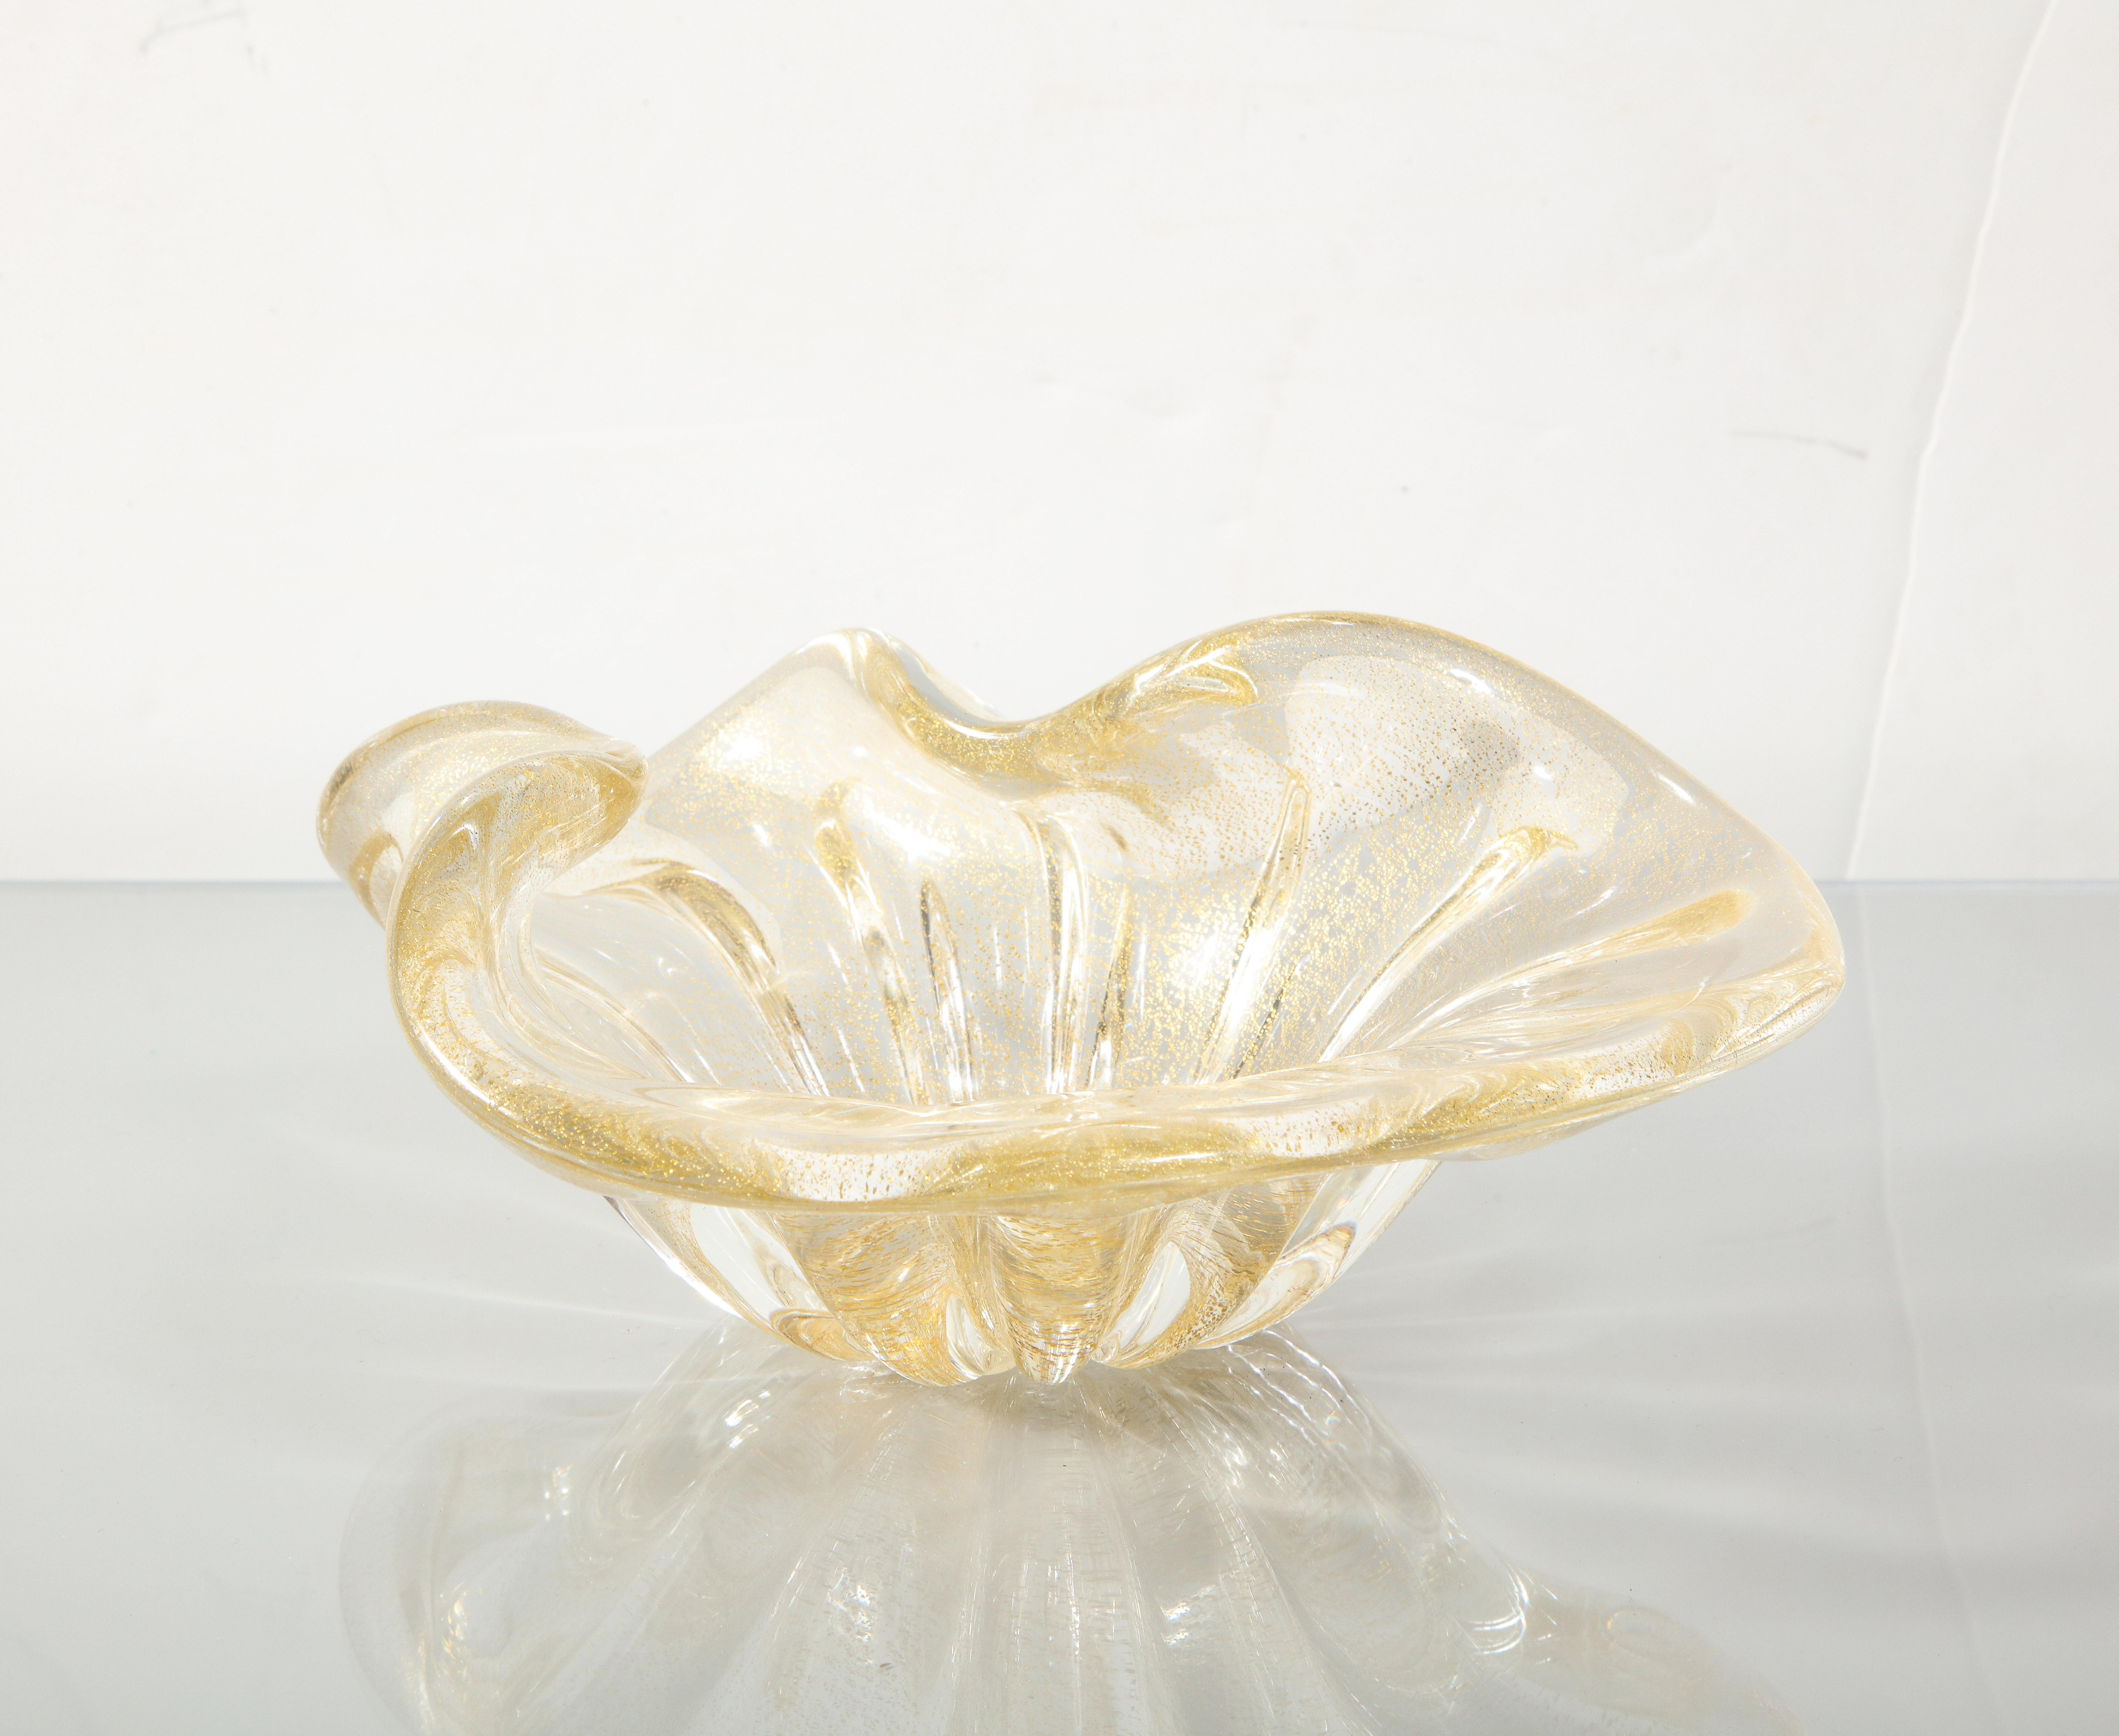 Vintage Murano glass bowl #2 with gold dust by Alberto Donà. Gracefully shaped bowl with 24-karat gold dust infusion.